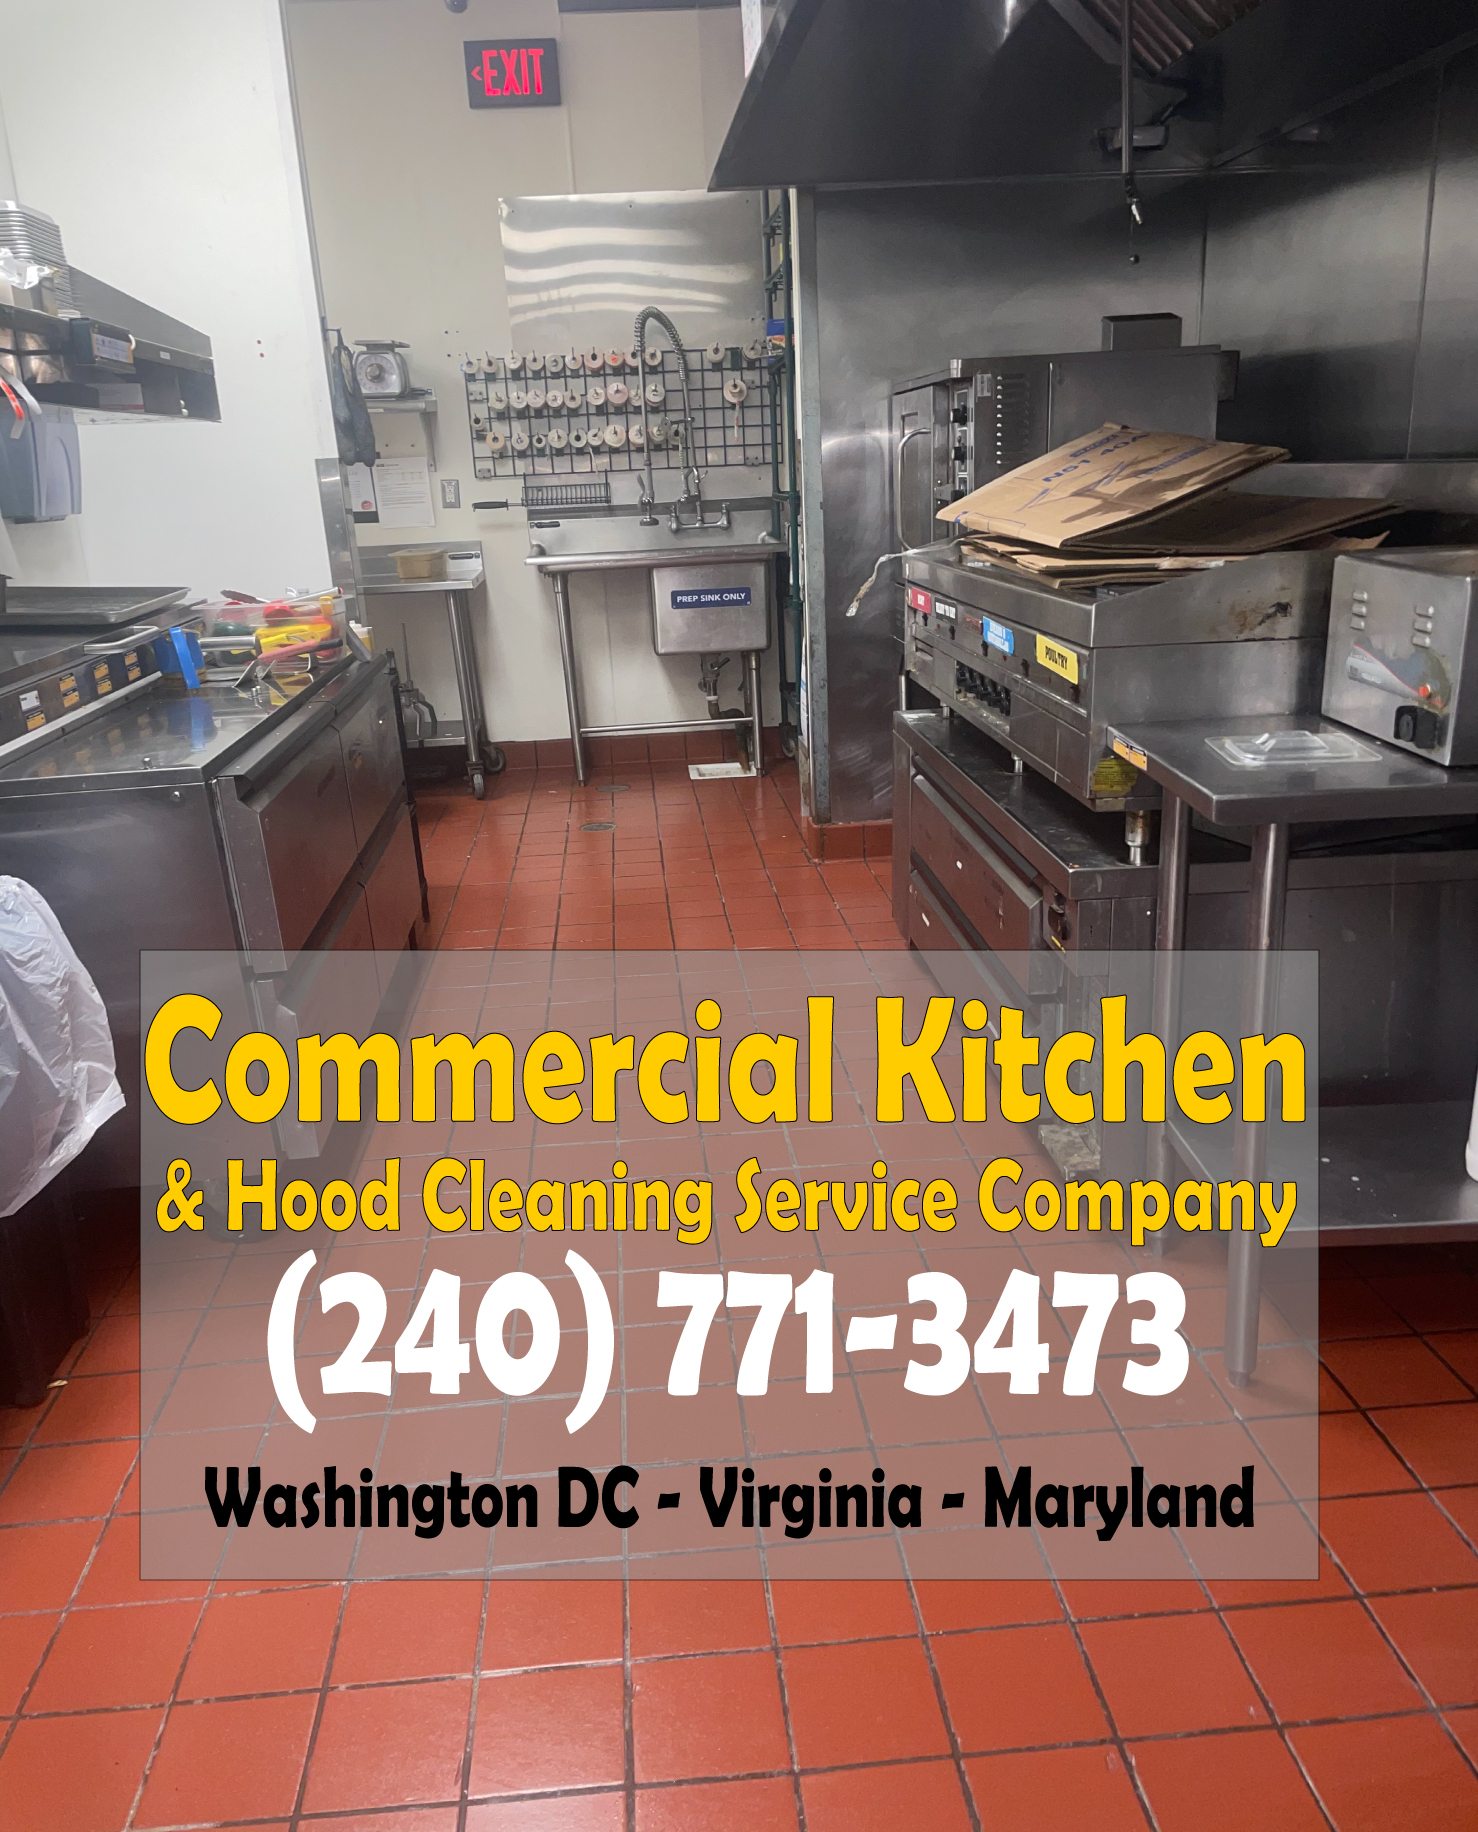 Professional Hood and Duct Cleaning - Maryland & Virginia